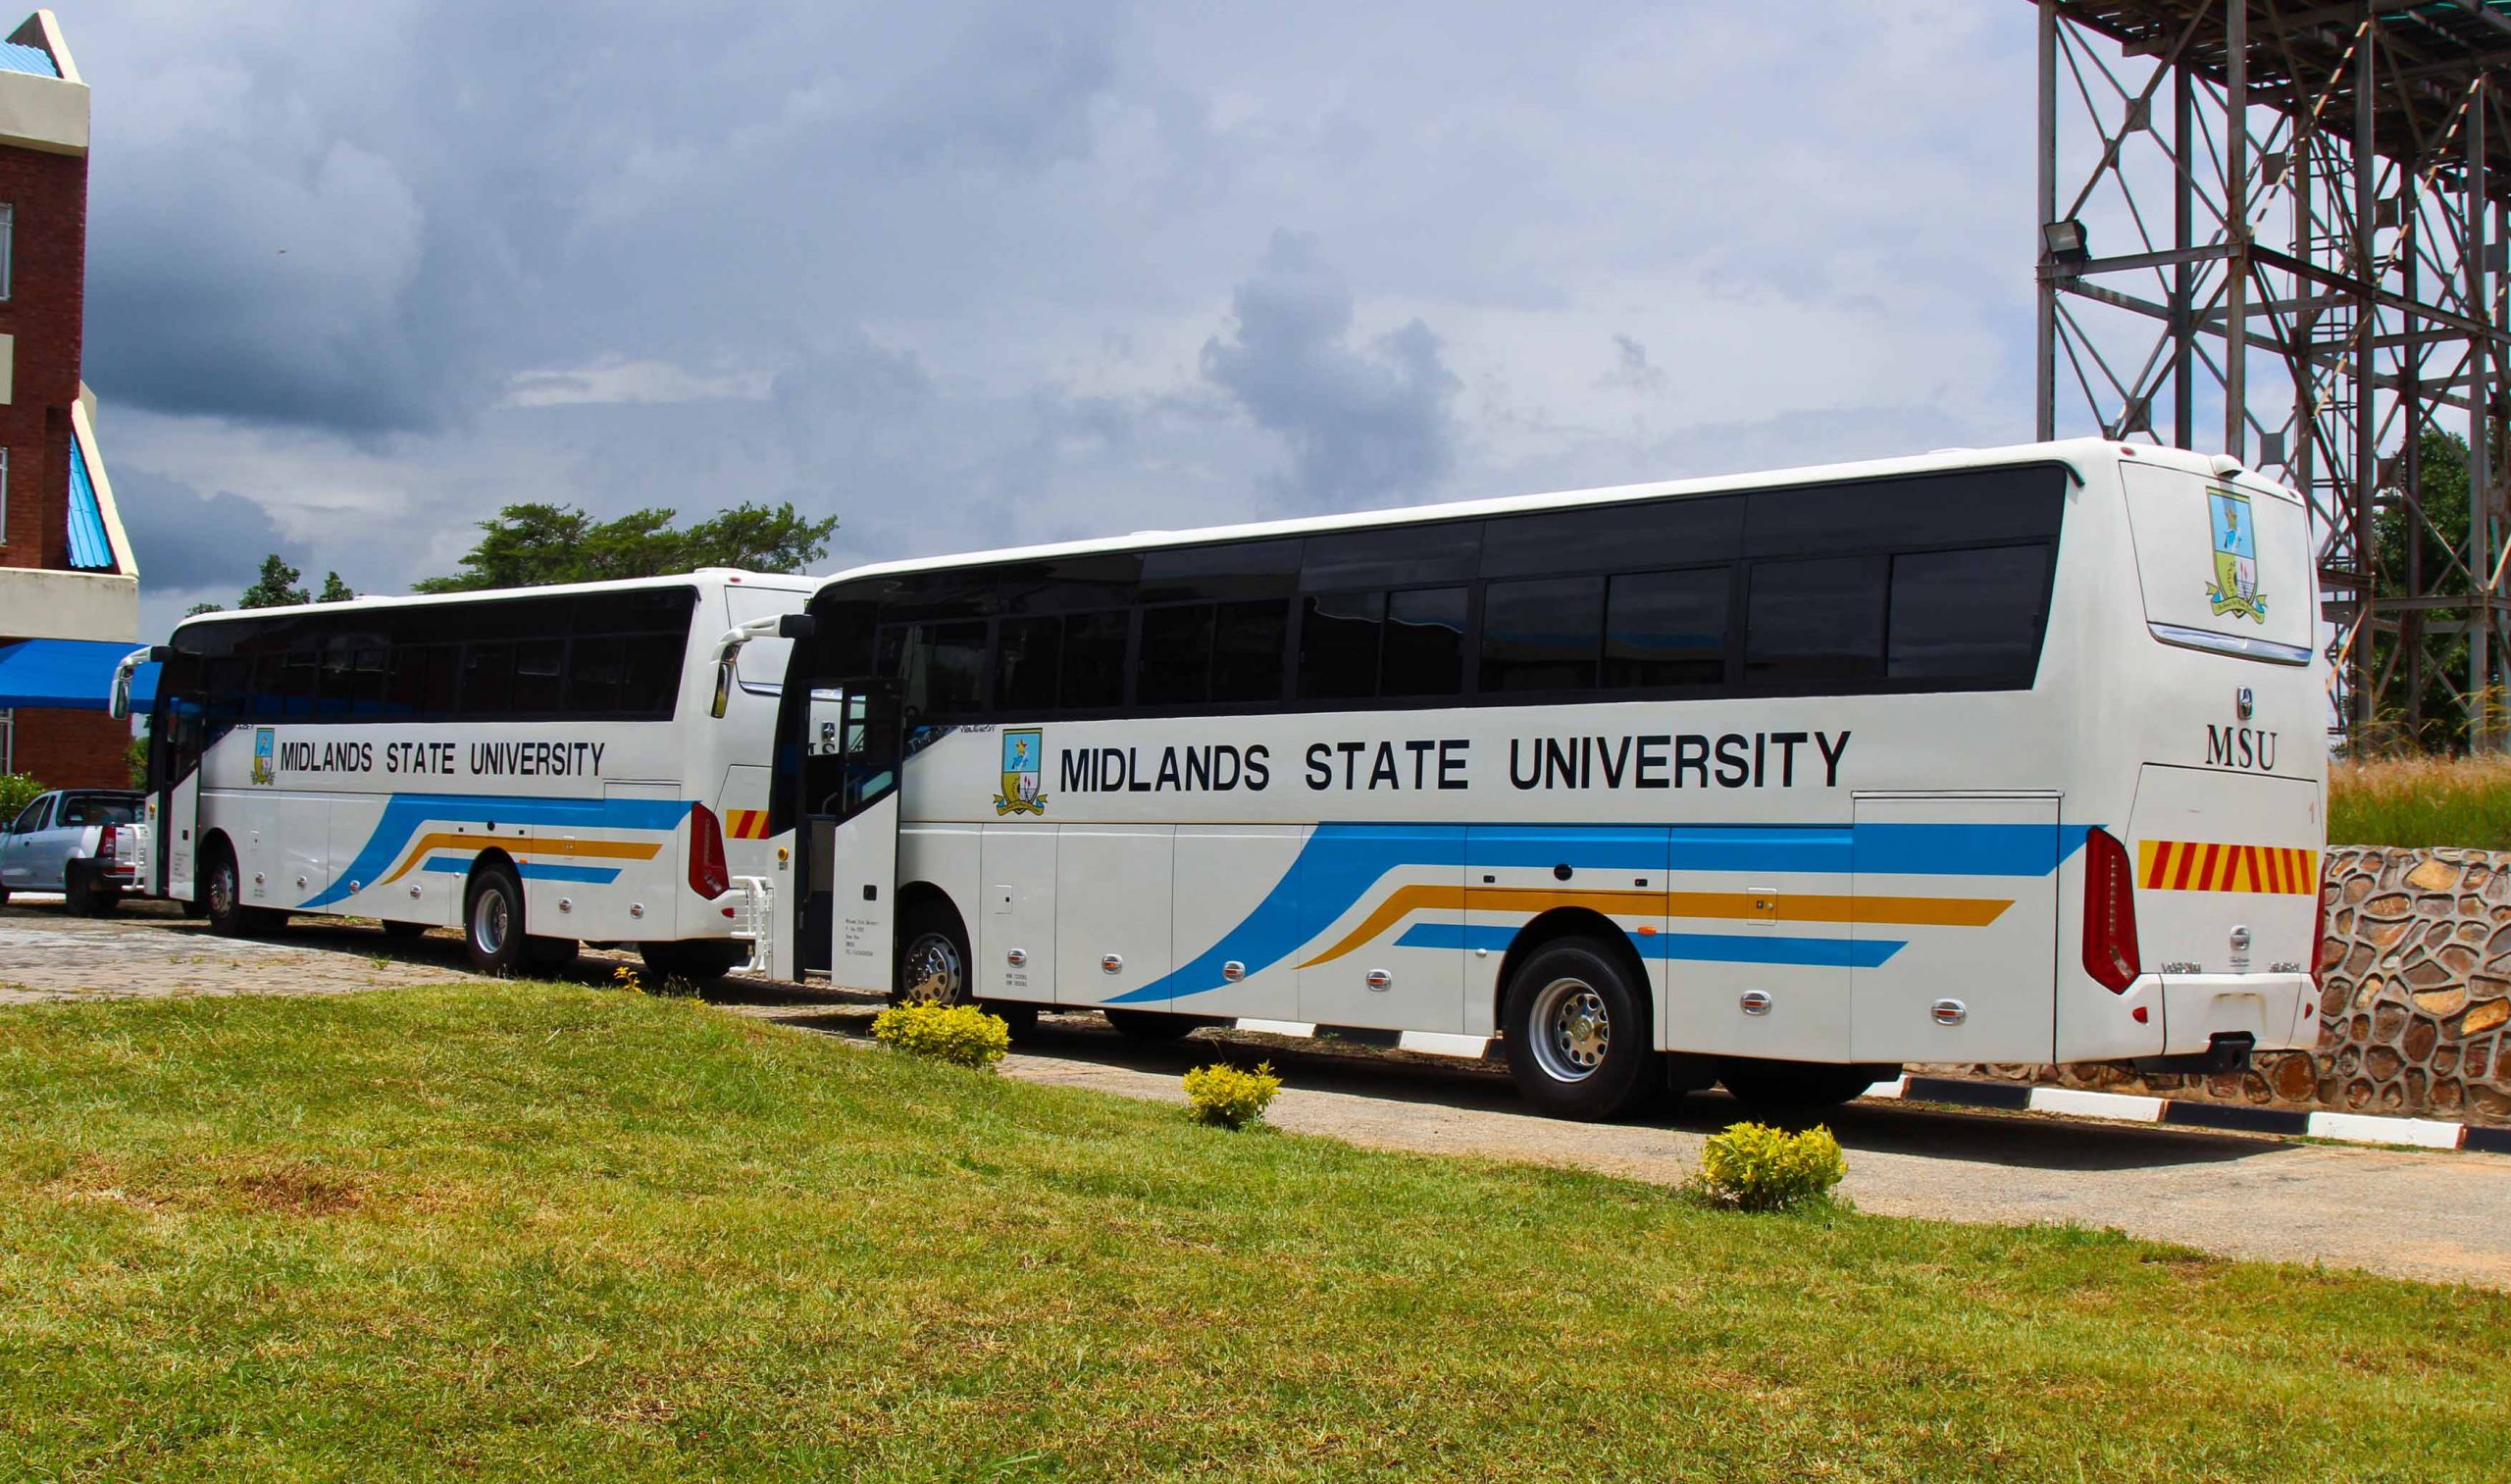 Midlands State University Acquires Two New Buses - Midlands State University